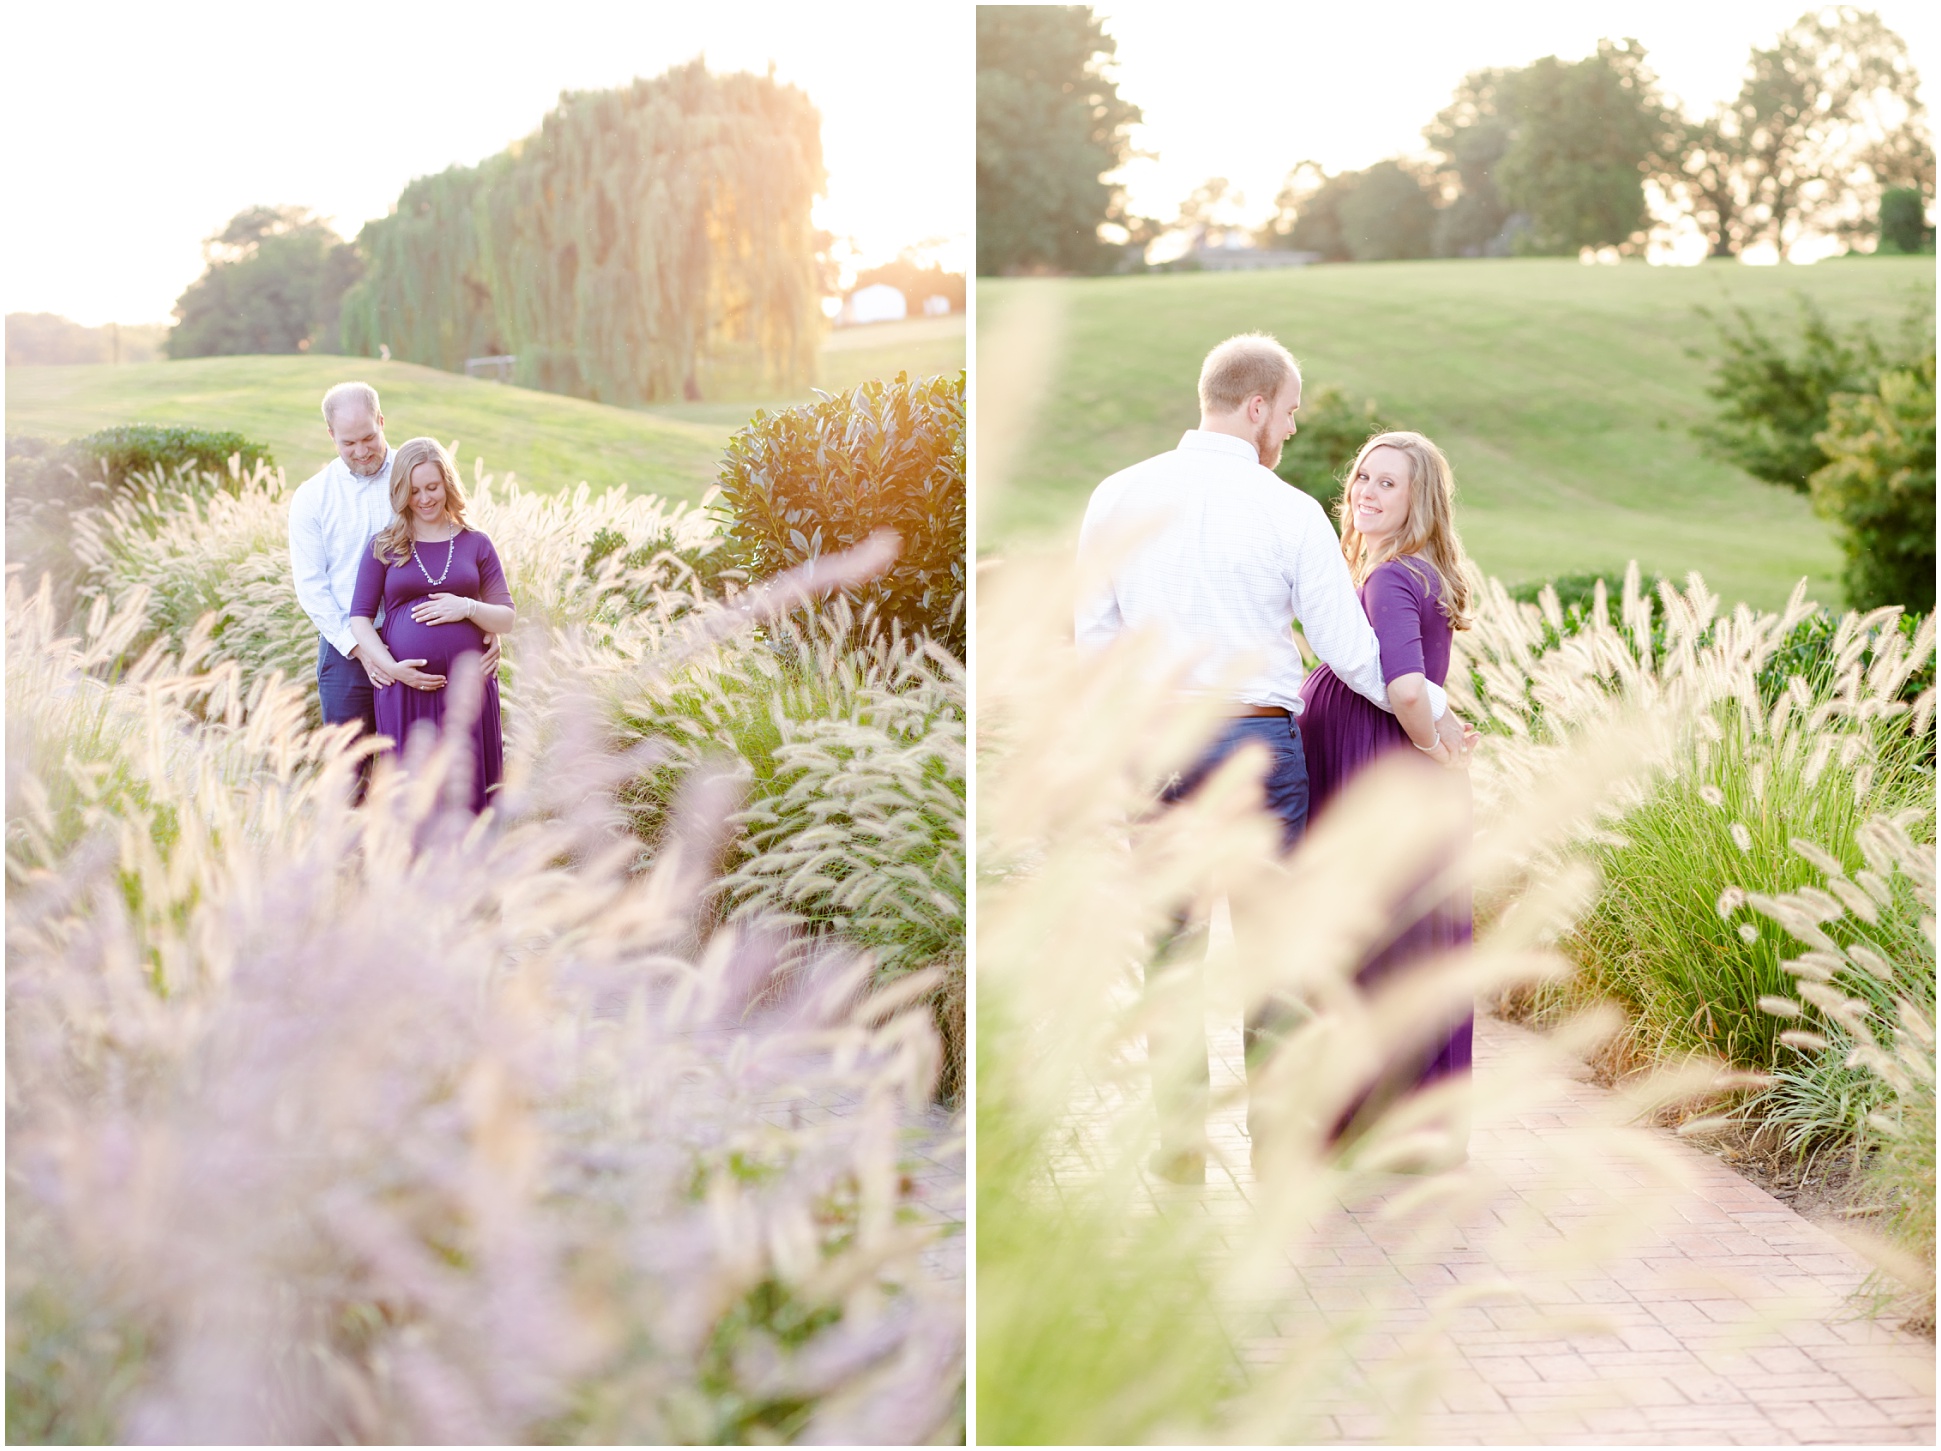 Two images of a maternity session with layering